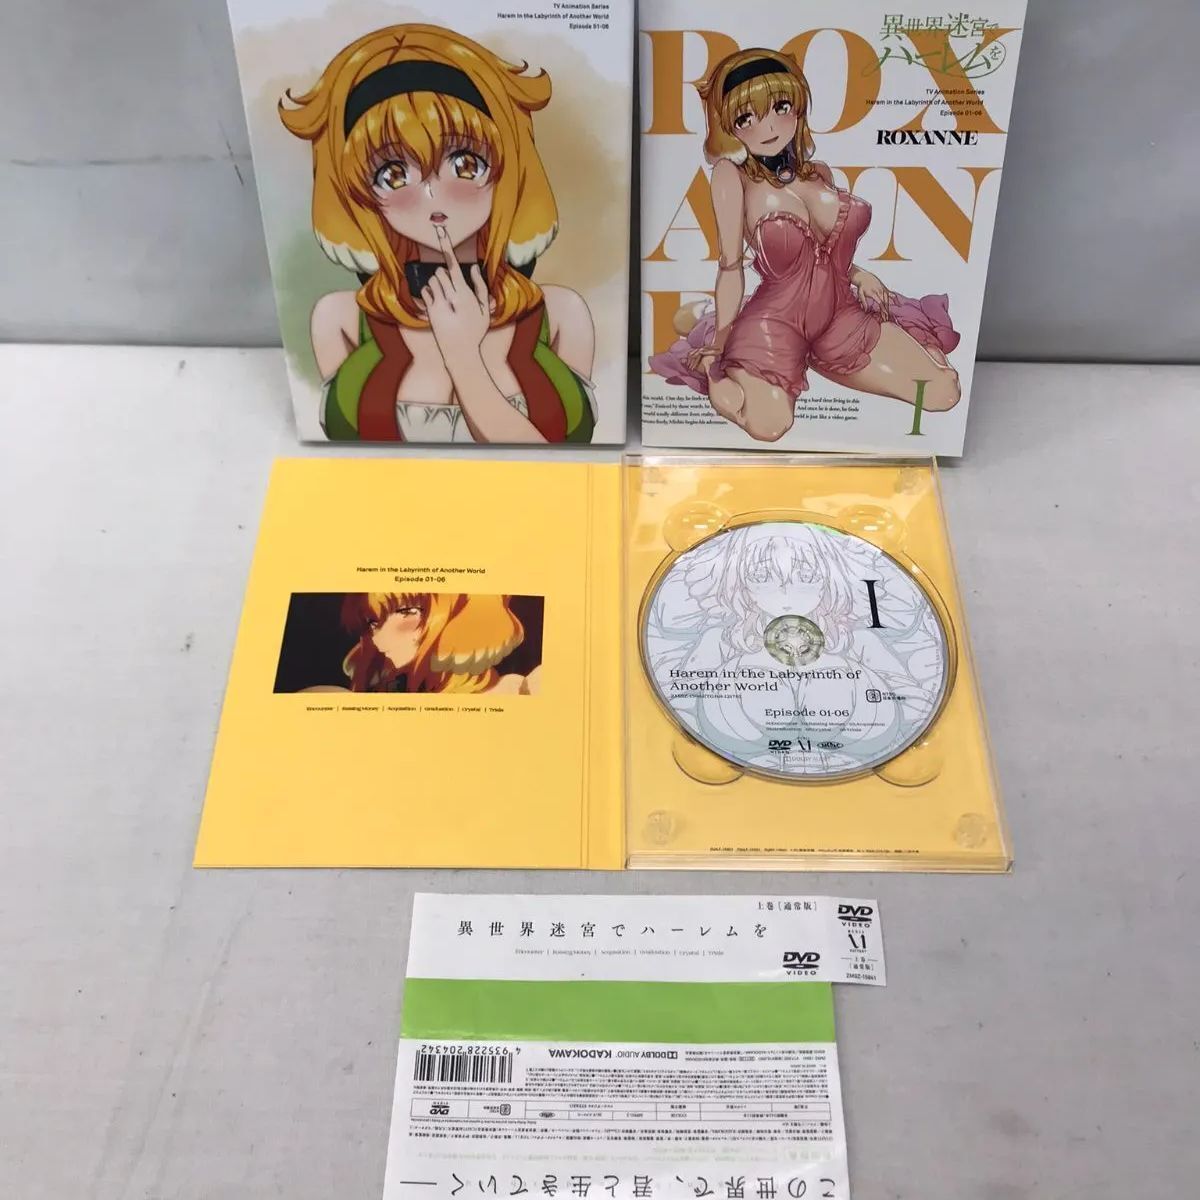 Harem in the Labyrinth of Another World: Vol. 1 Blu-ray (異世界